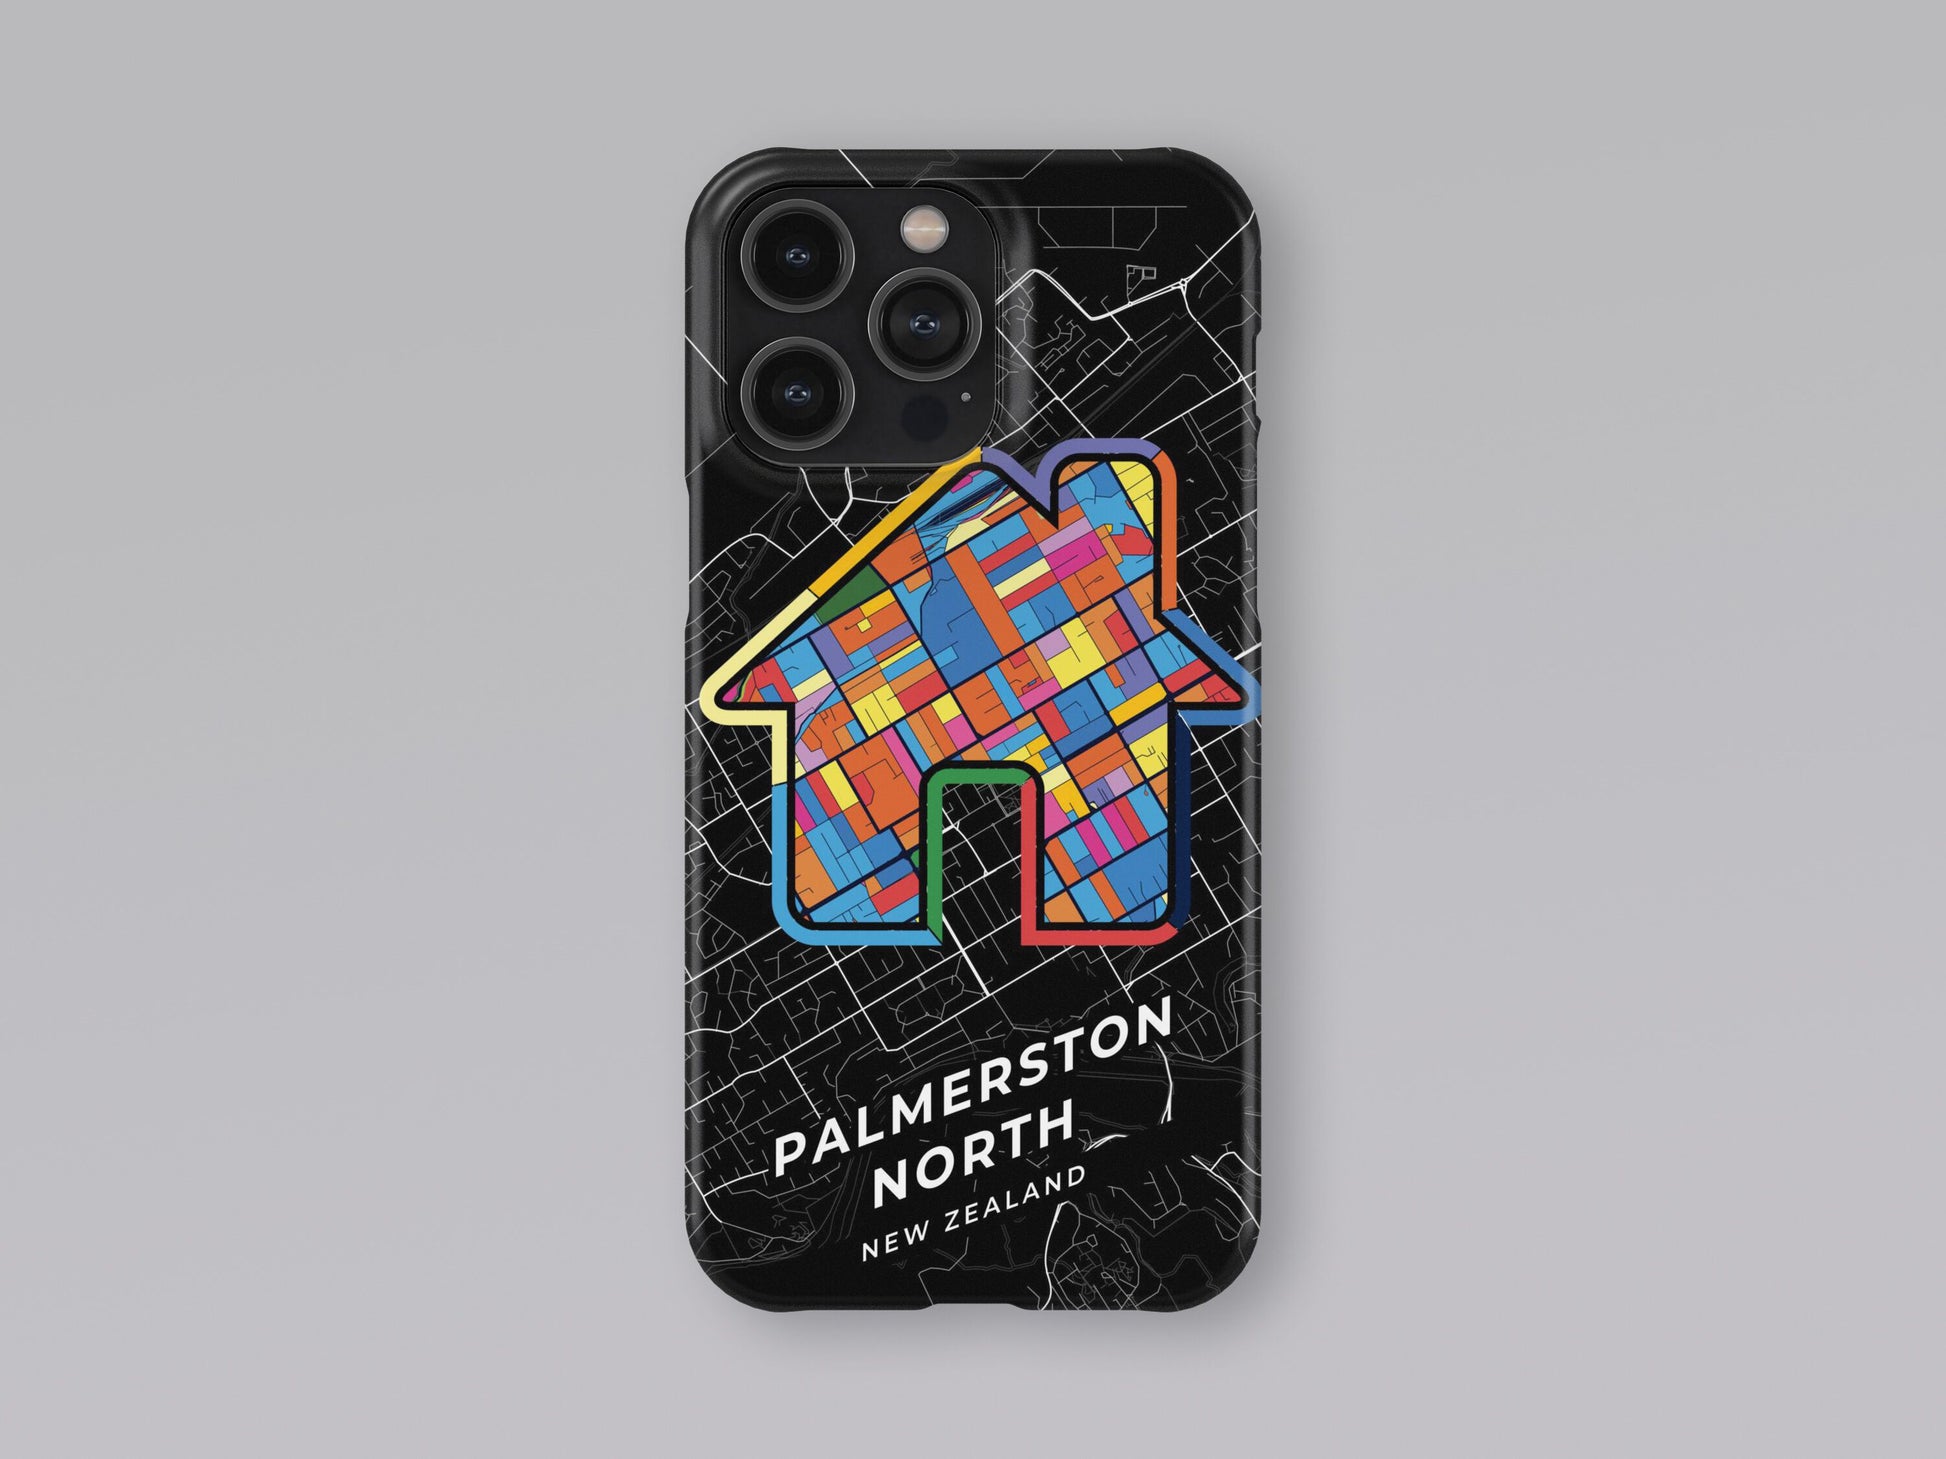 Palmerston North New Zealand slim phone case with colorful icon. Birthday, wedding or housewarming gift. Couple match cases. 3